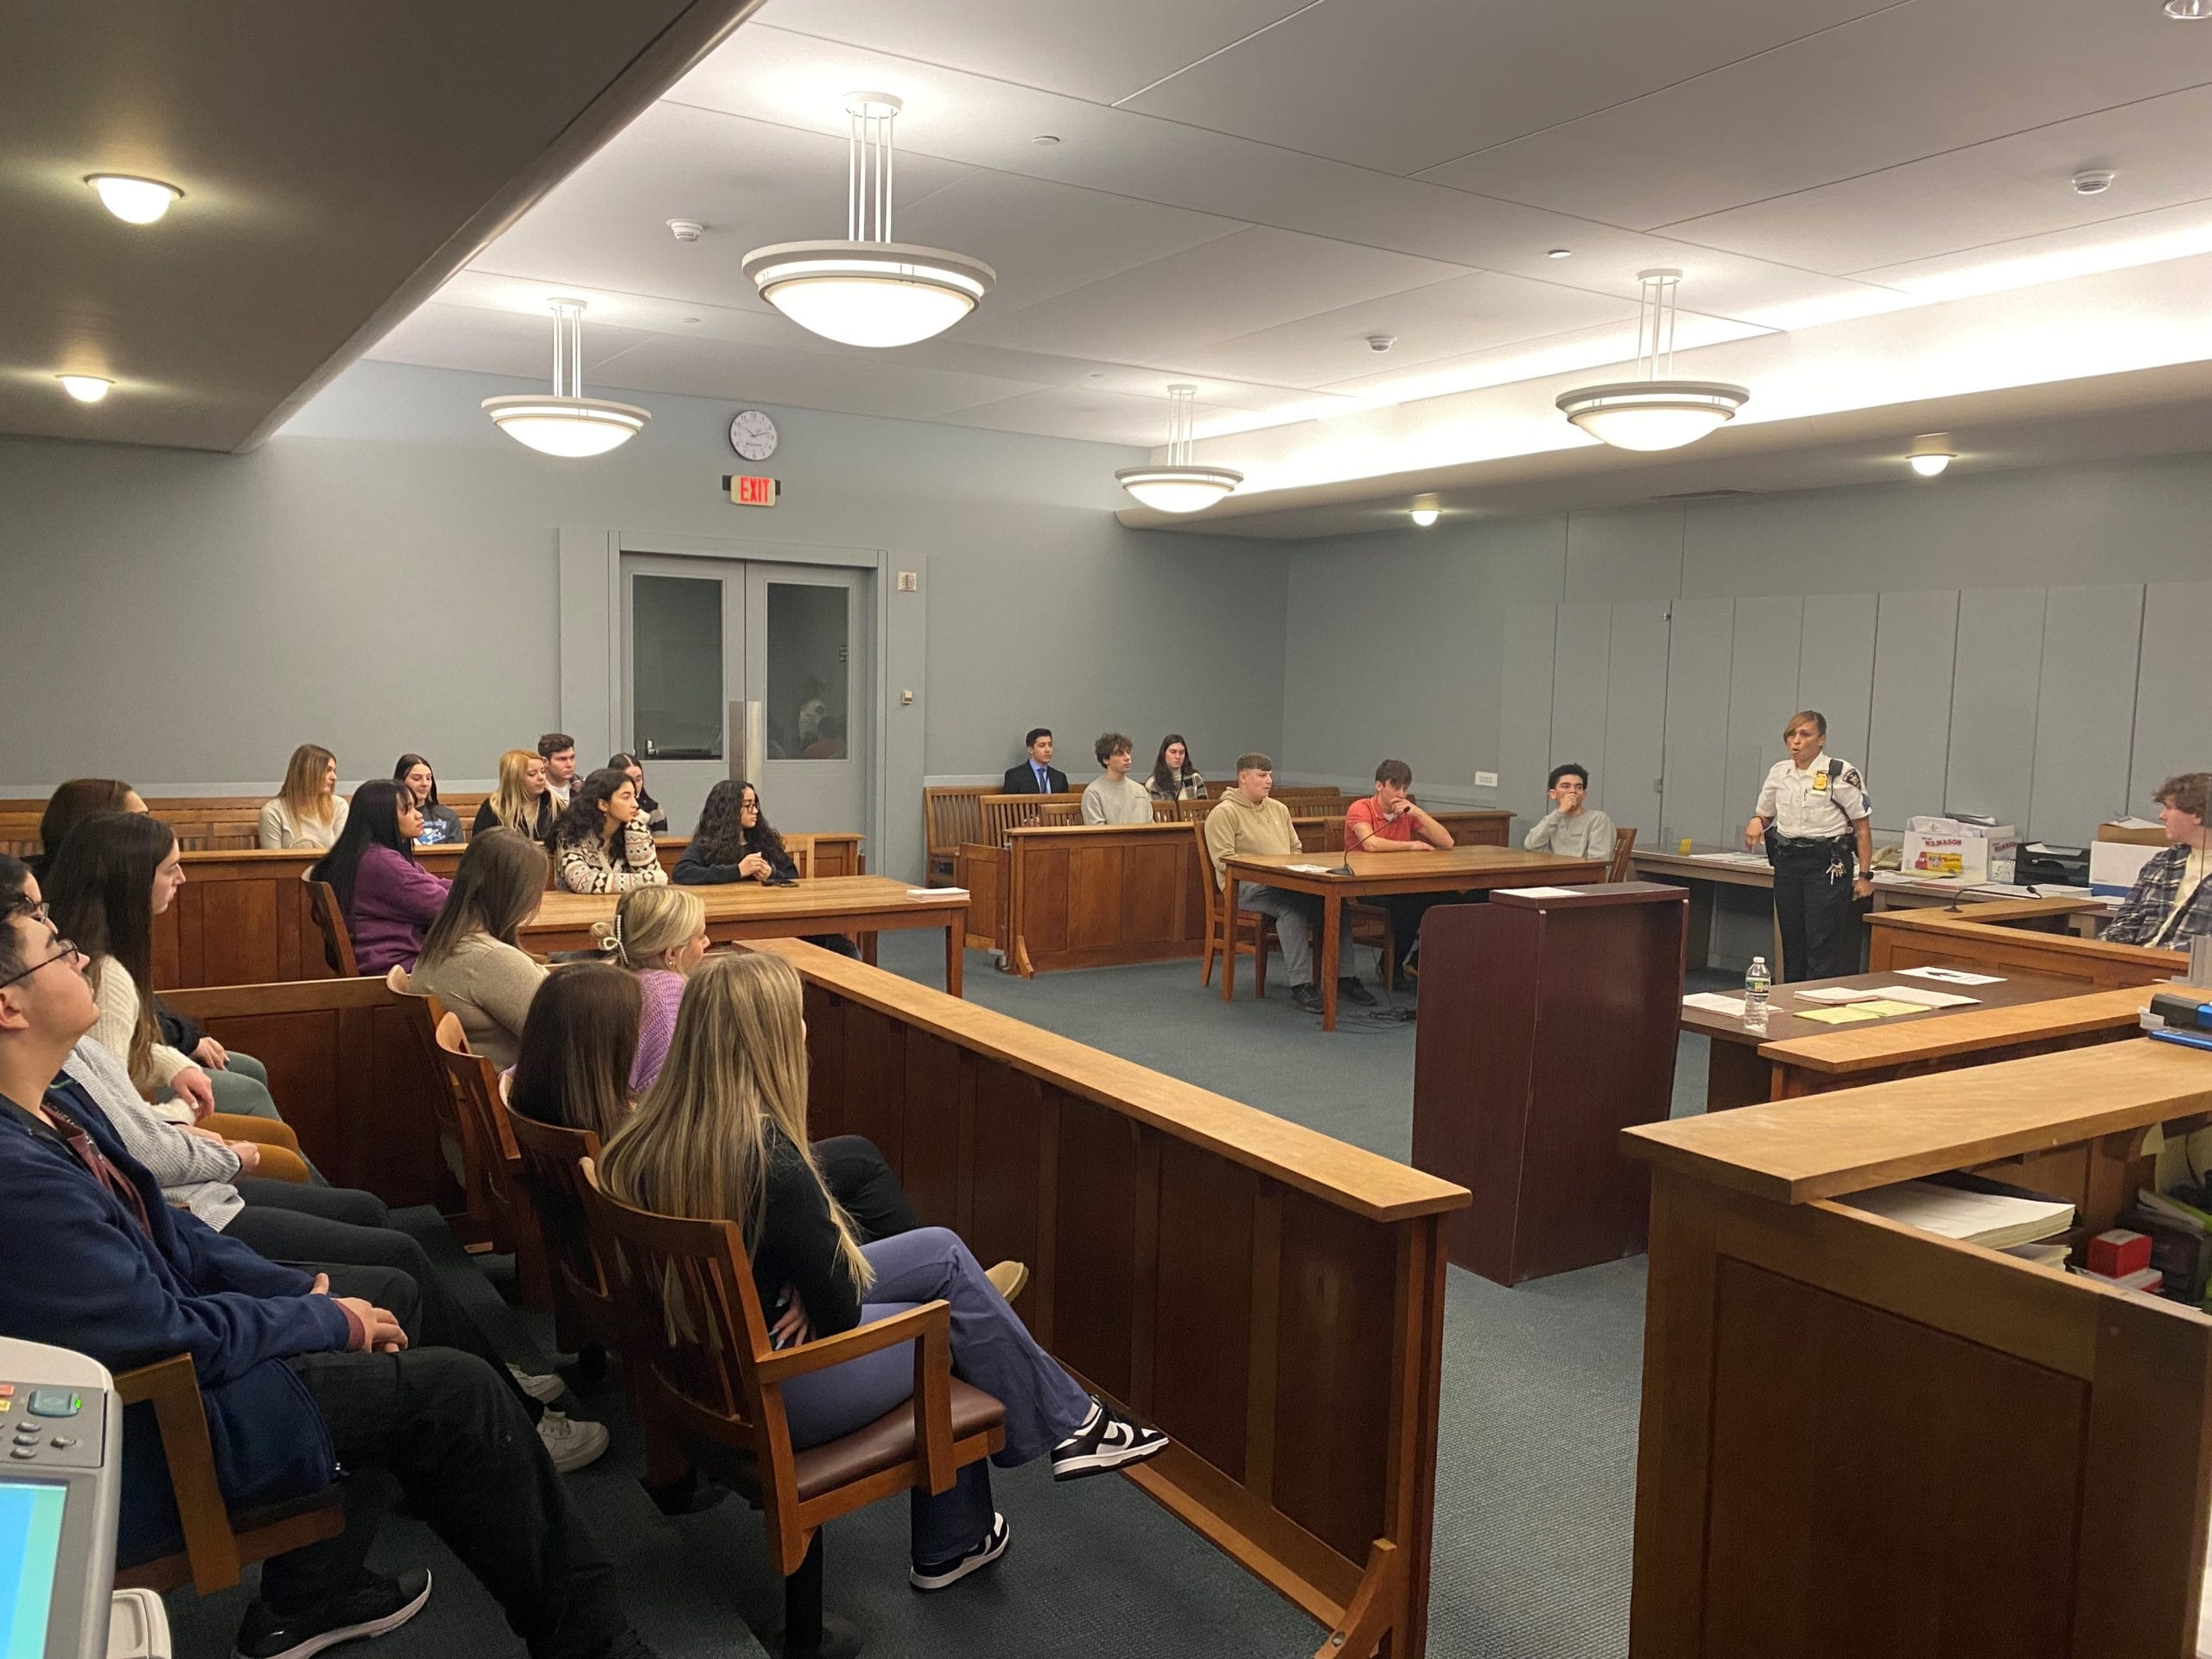 Field Trip Provides Inside Look At Suffolk County Court System